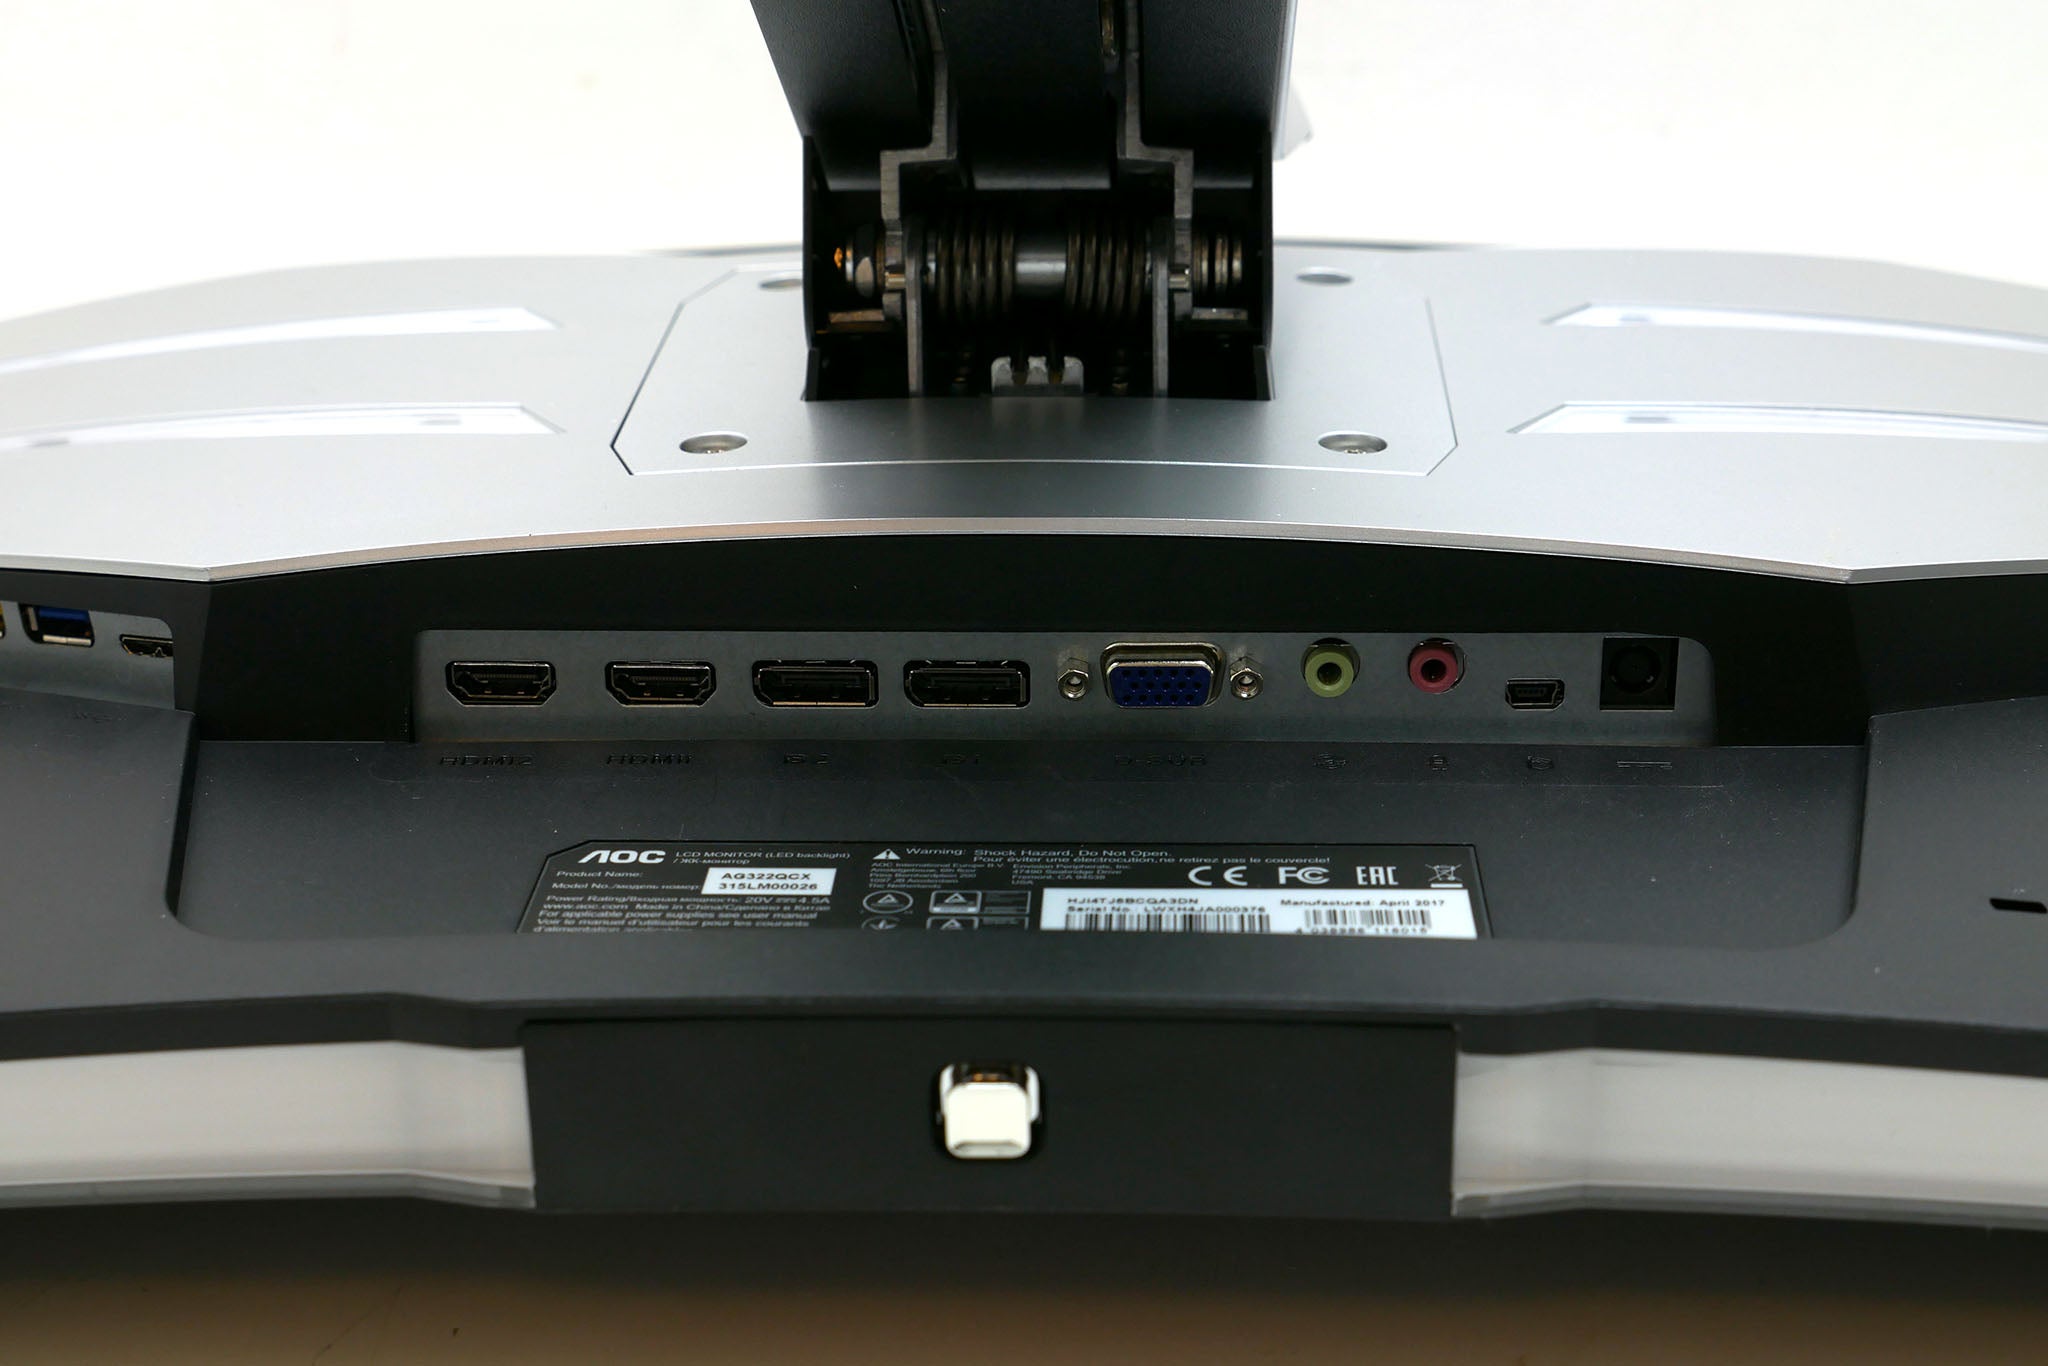 Close-up of AOC AG322QCX monitor's connectivity ports.